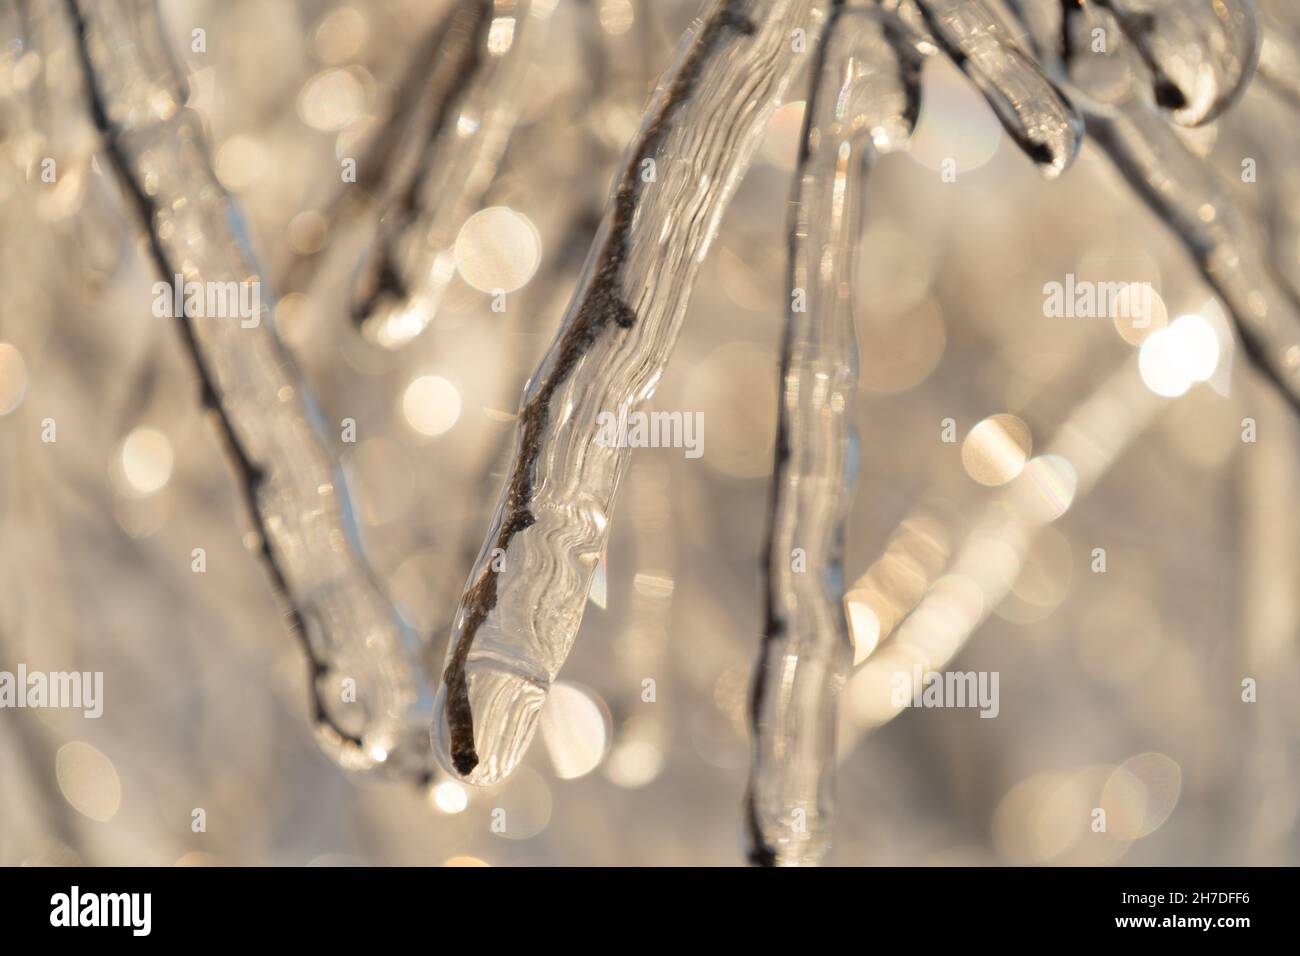 Natural background with ice crystals on plants after an icy rain. Stock Photo